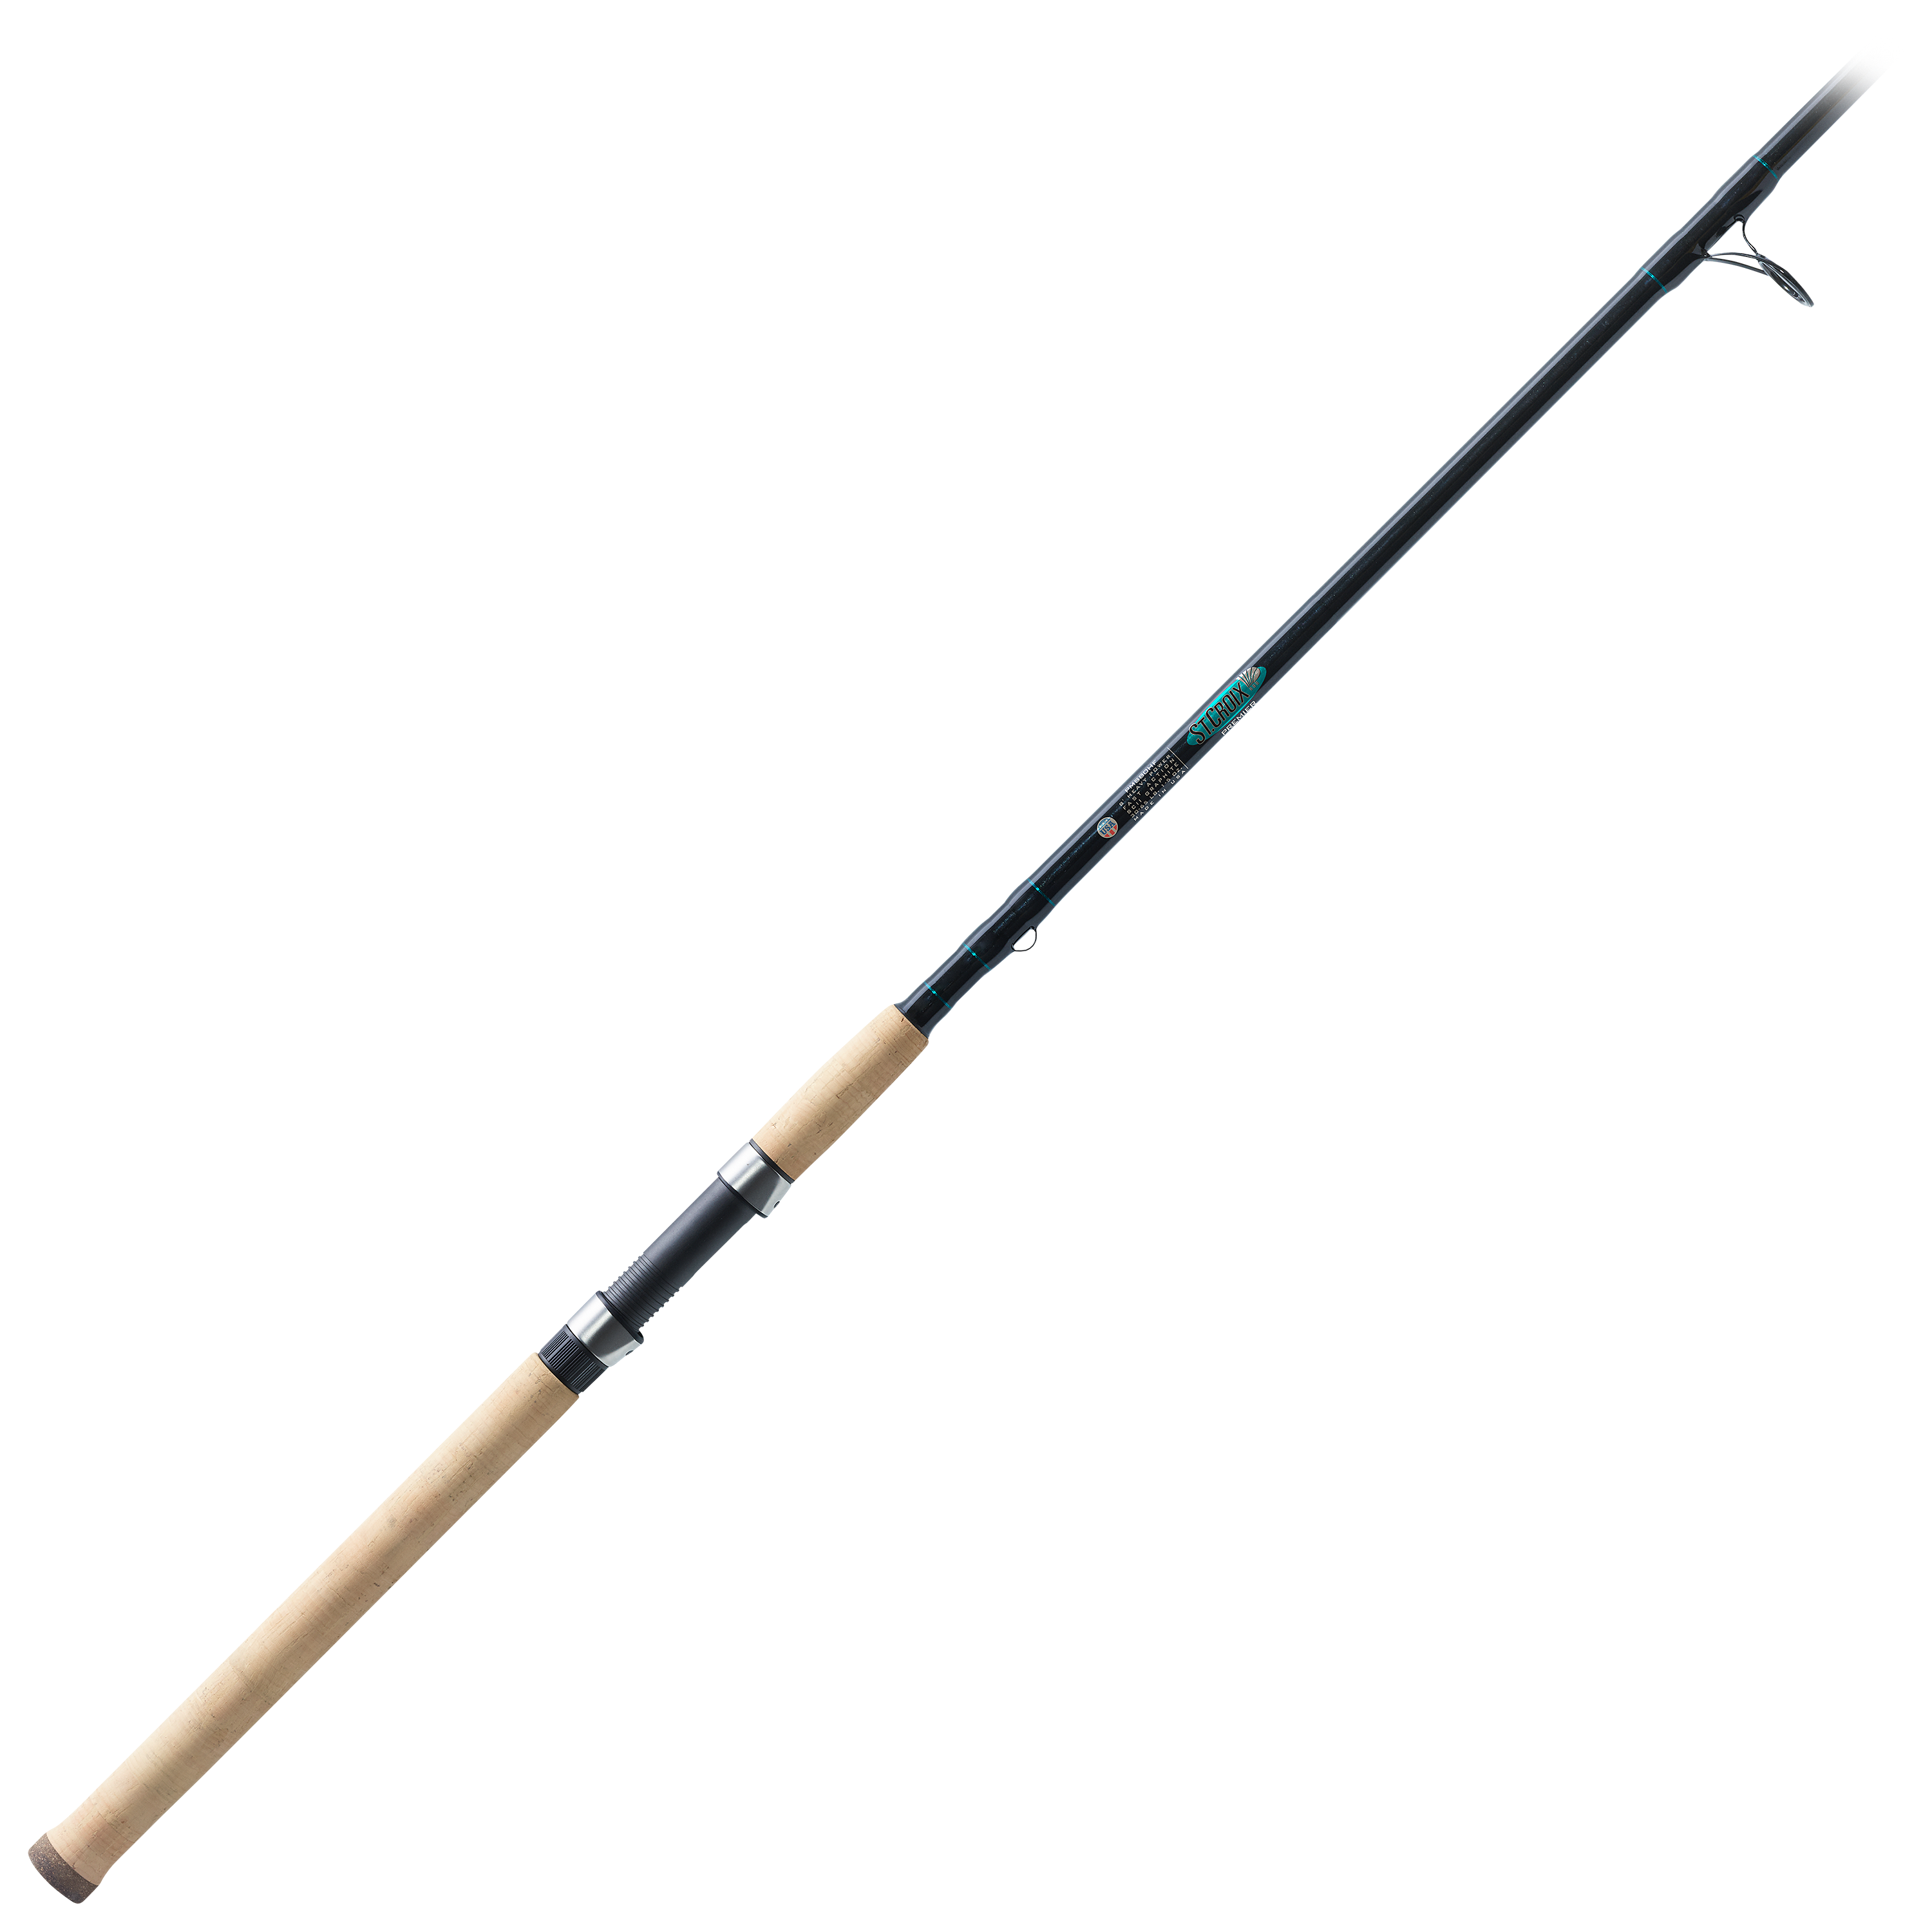 St. Croix Premier Series Musky Spinning Rod - PMS80HF